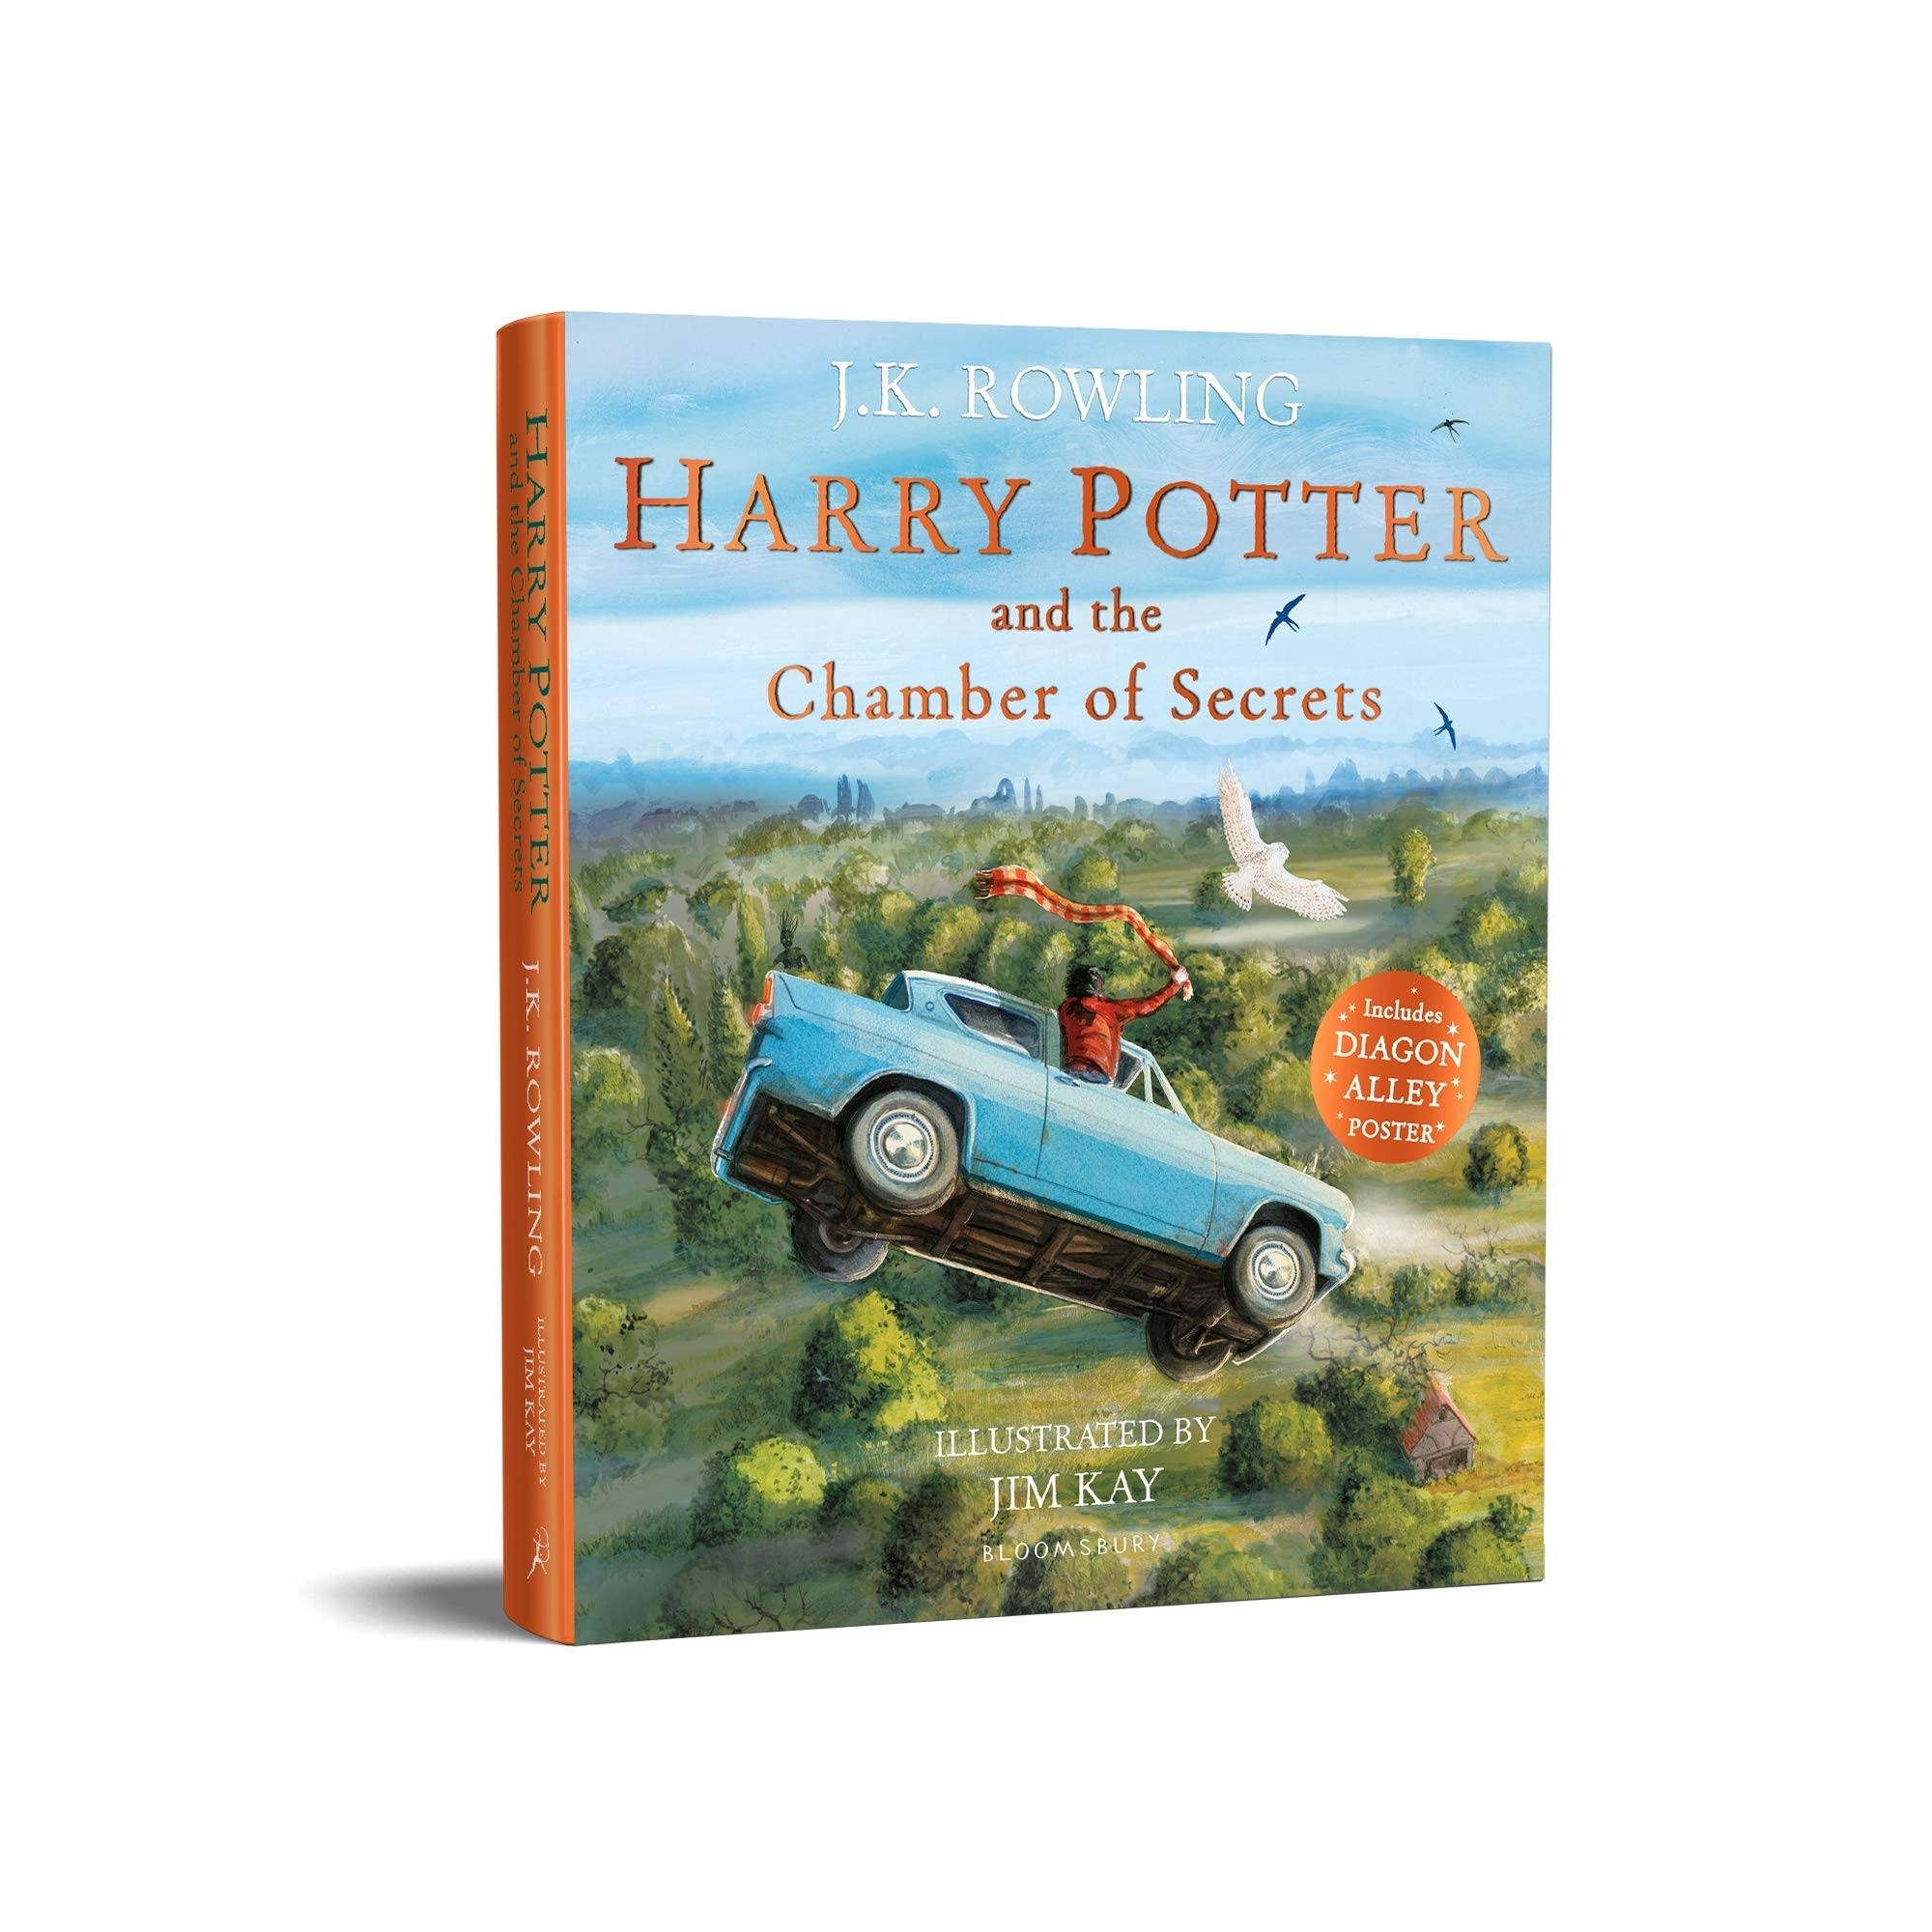 Harry Potter and the Chamber of Secrets: Illustrated Edition - J.K. Rowling